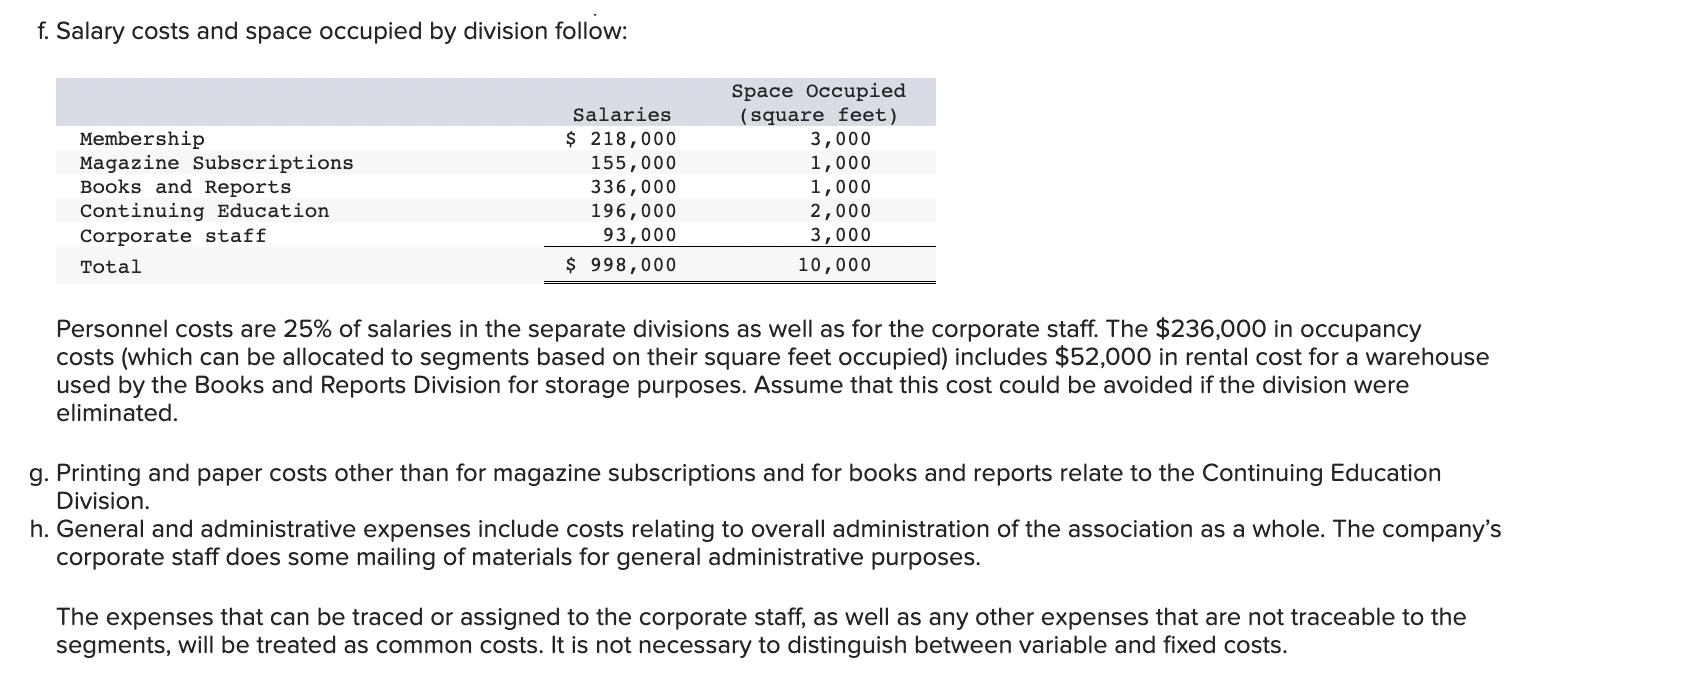 f. Salary costs and space occupied by division follow: Membership Magazine Subscriptions Books and Reports